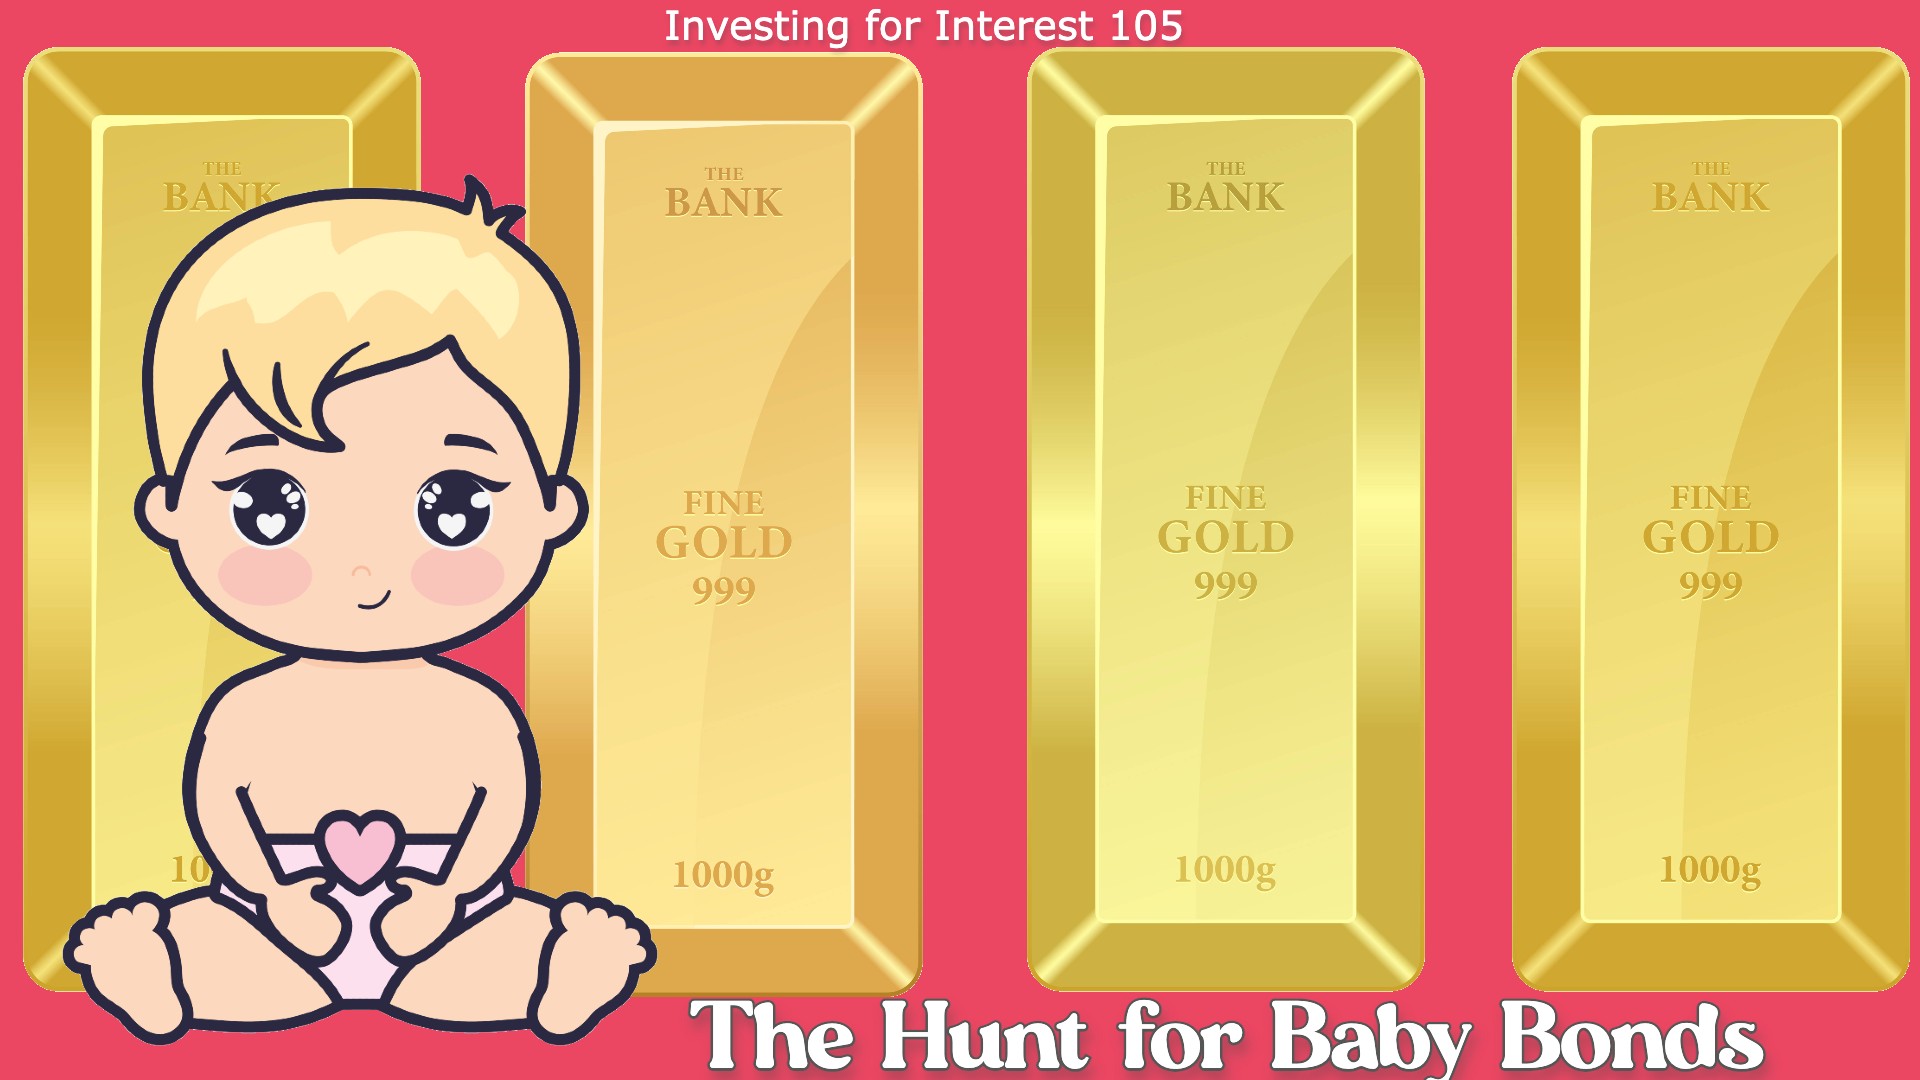 Investing for Interest 105: The Hunt for Baby Bonds